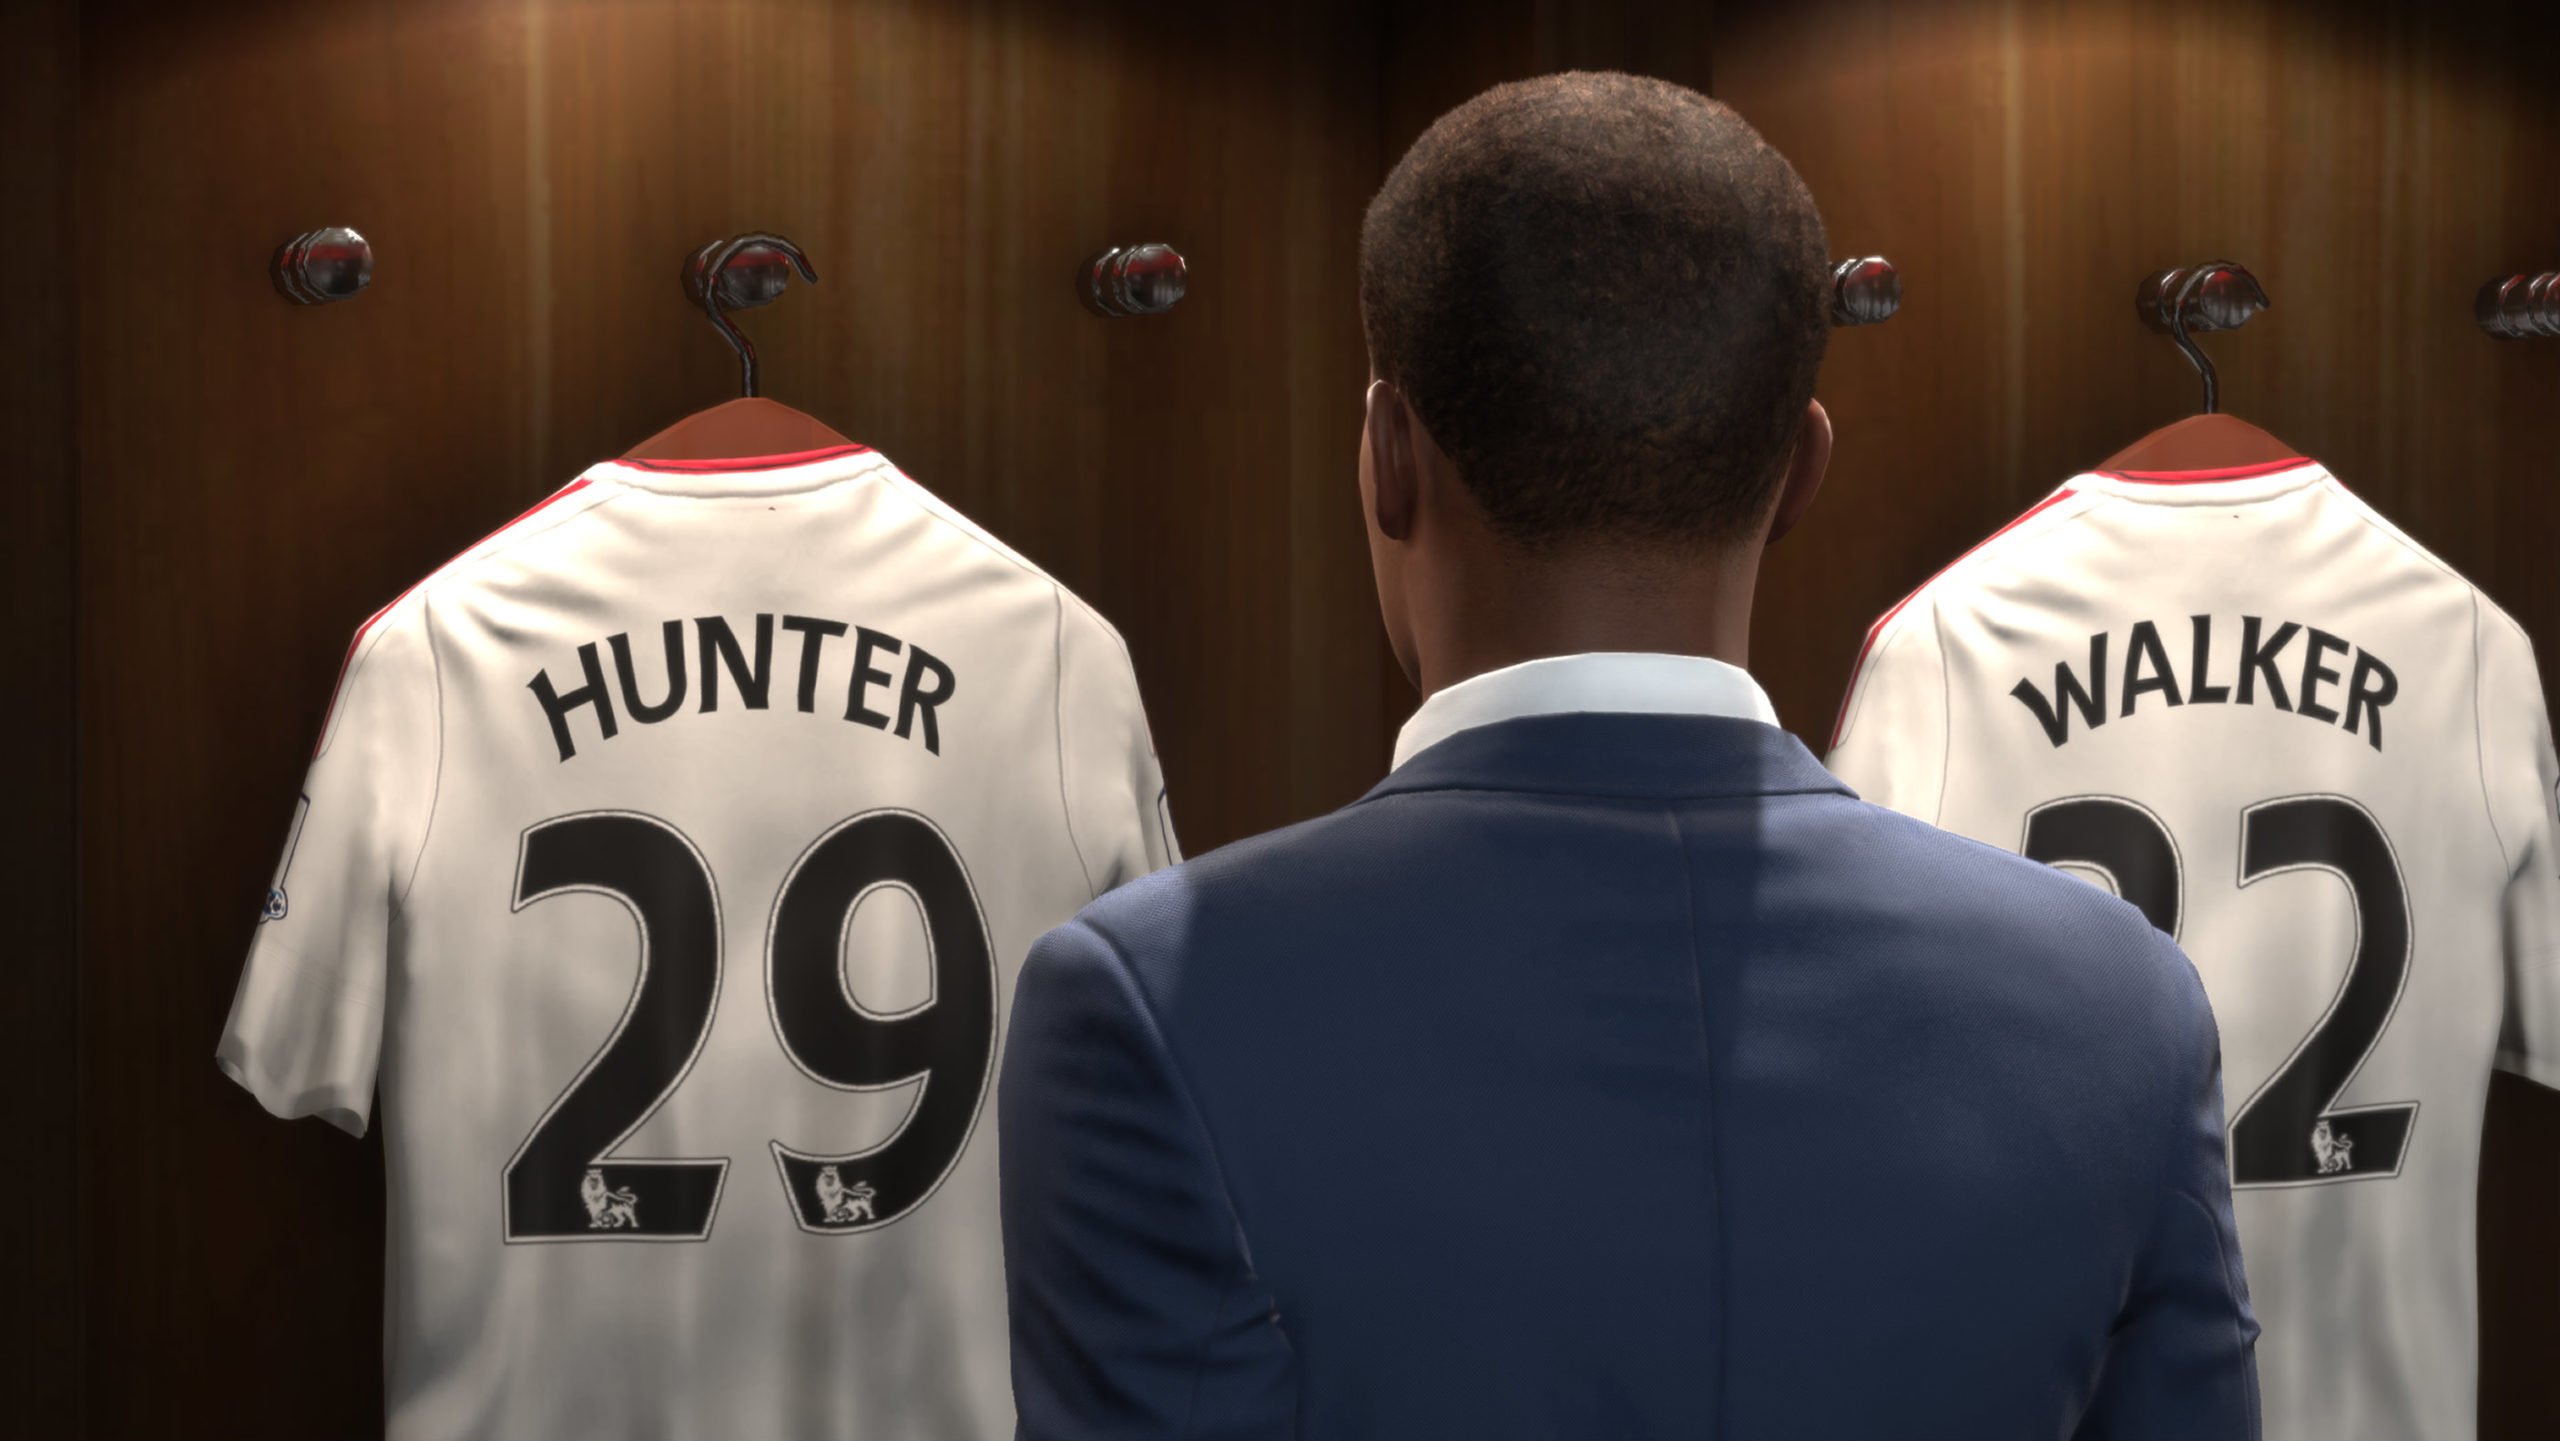 Fifa 17 S The Journey Imperfect But Ea Could Be Onto Something Really Special If They Stick With It